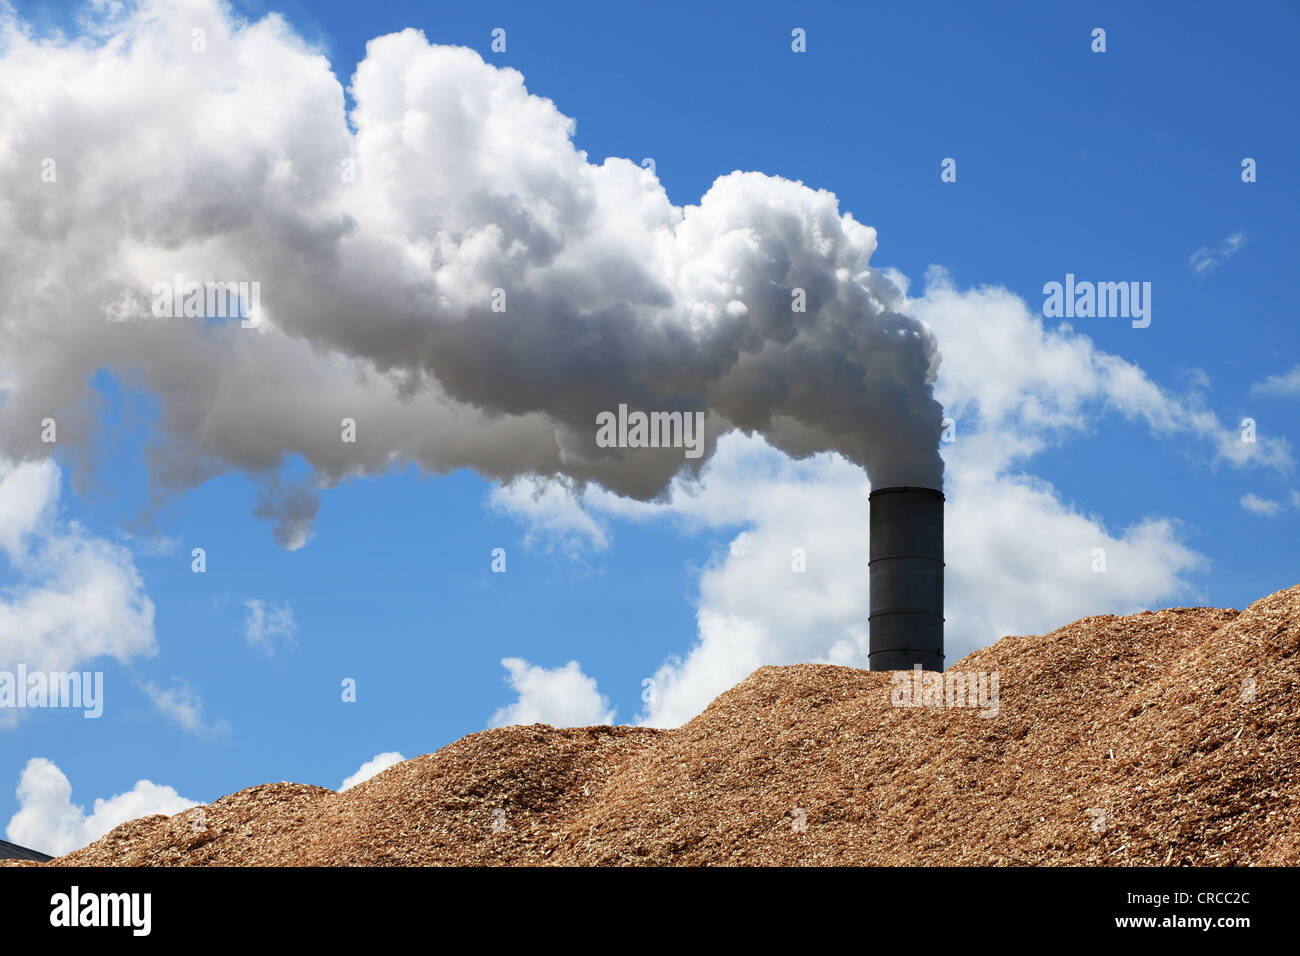 Billowing exhaust from a chimney above a large heap of wood chippings Egger chipboard factory Hexham Northumberland England UK Stock Photo